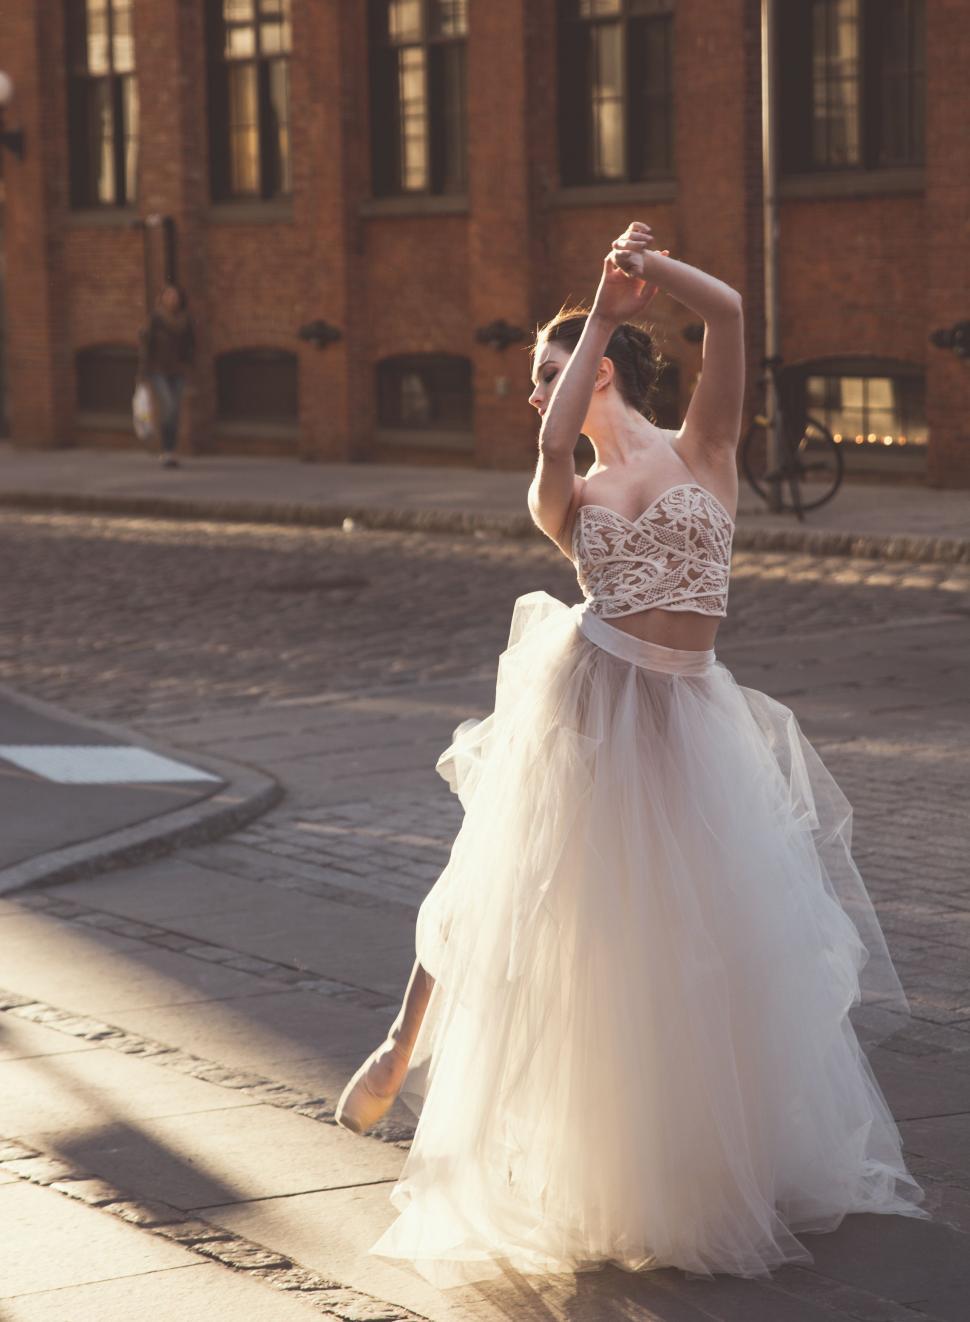 Free Image of Woman in White Dress Dancing on Street 